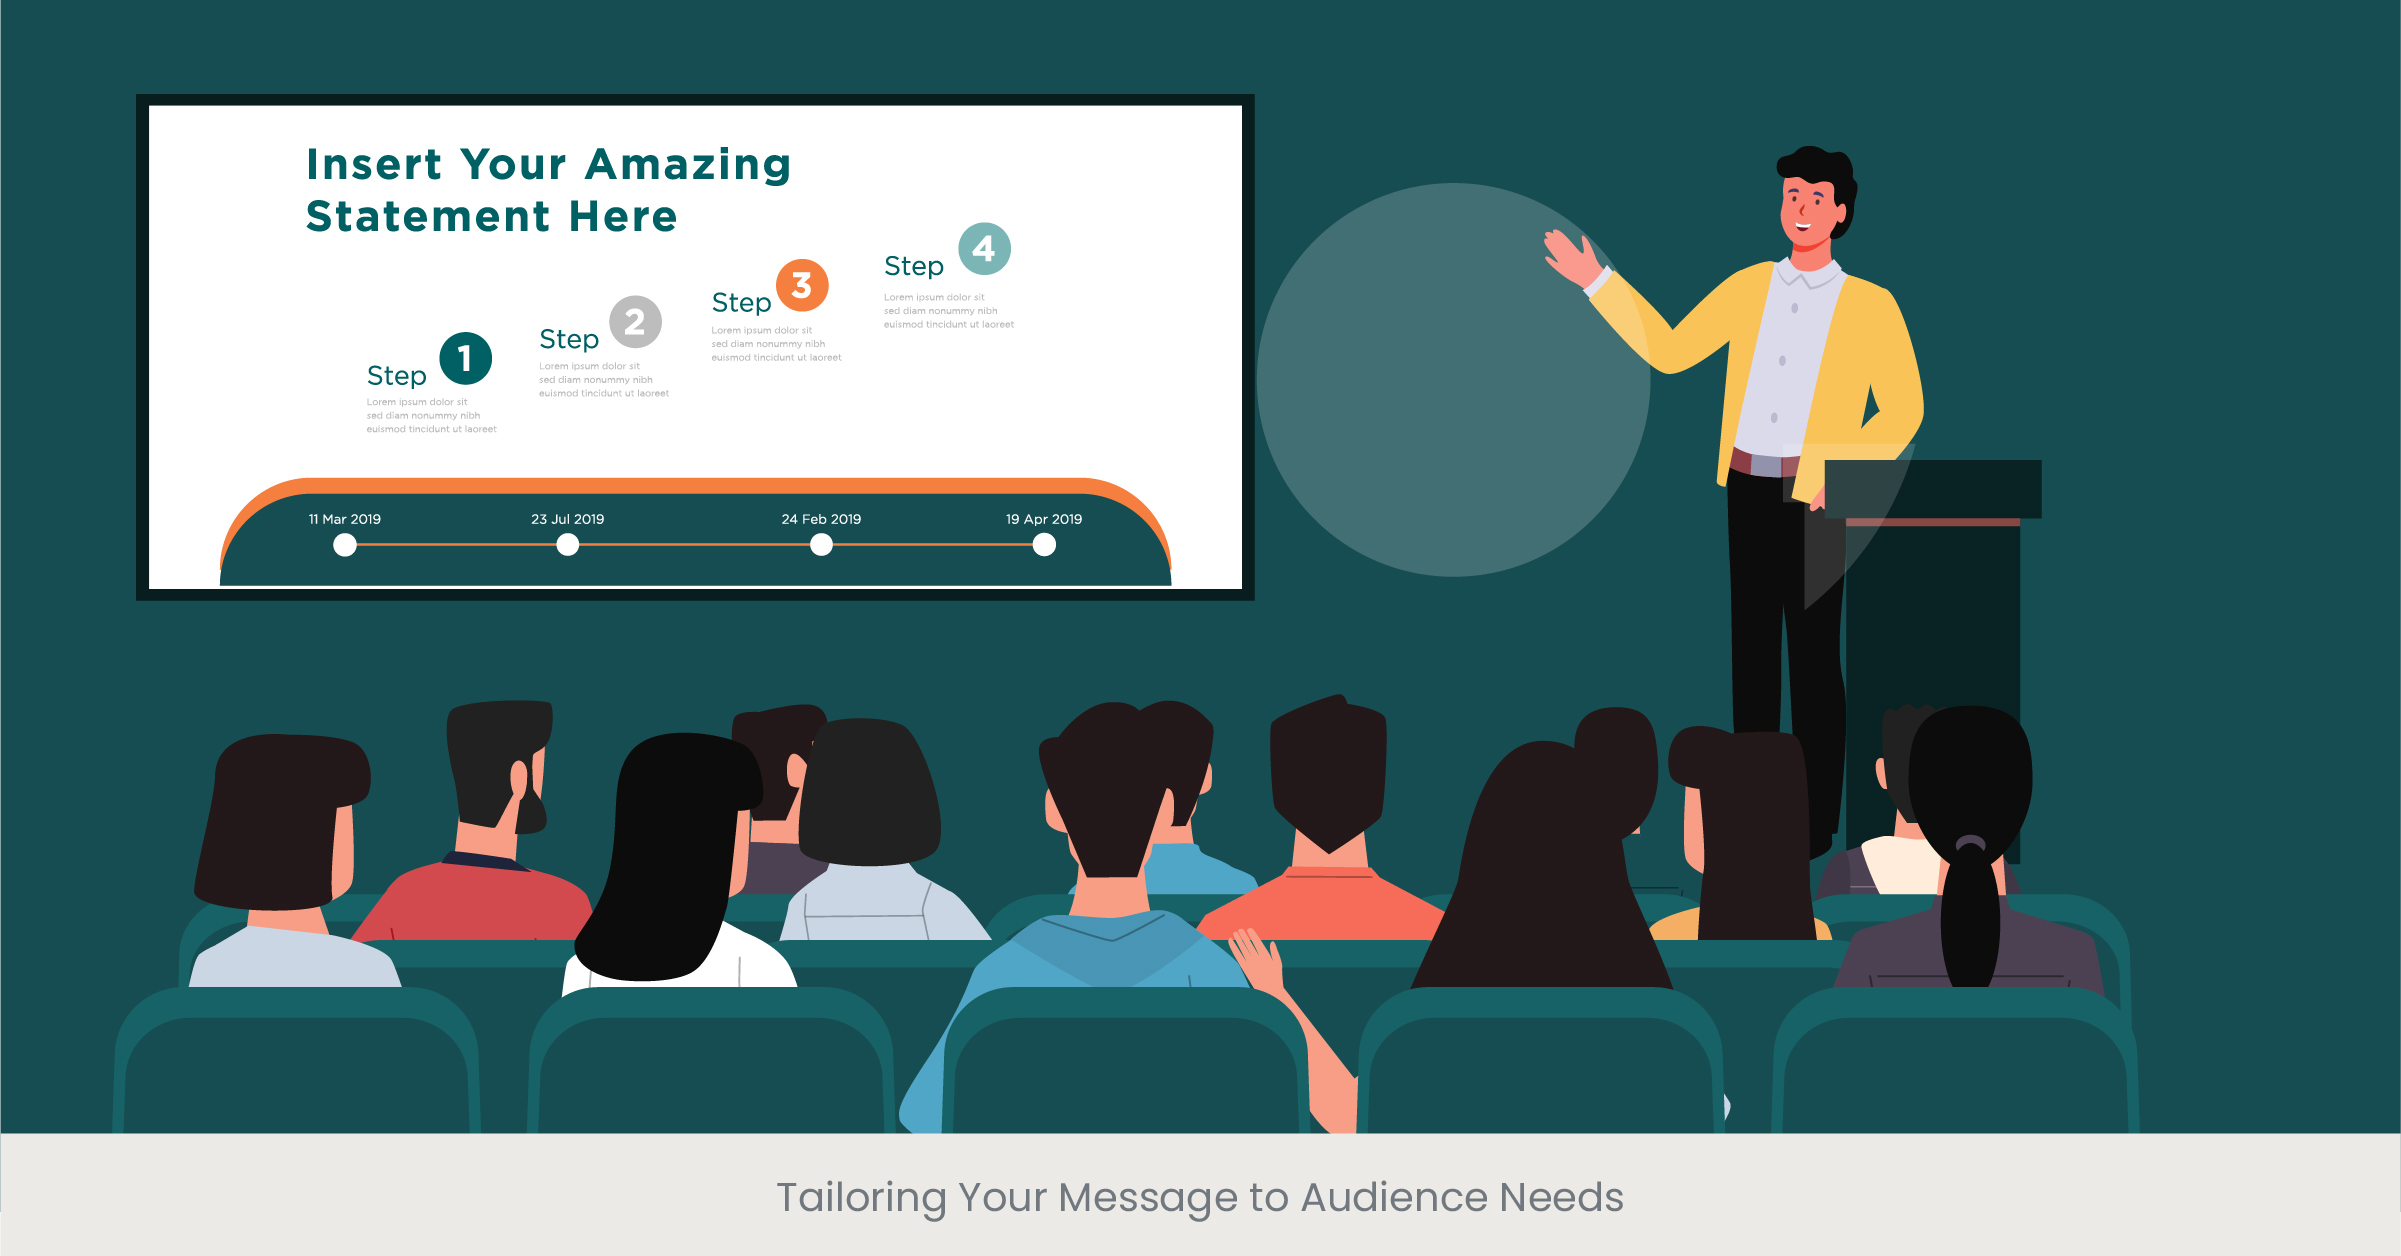 Tailoring Your Message to Audience Needs